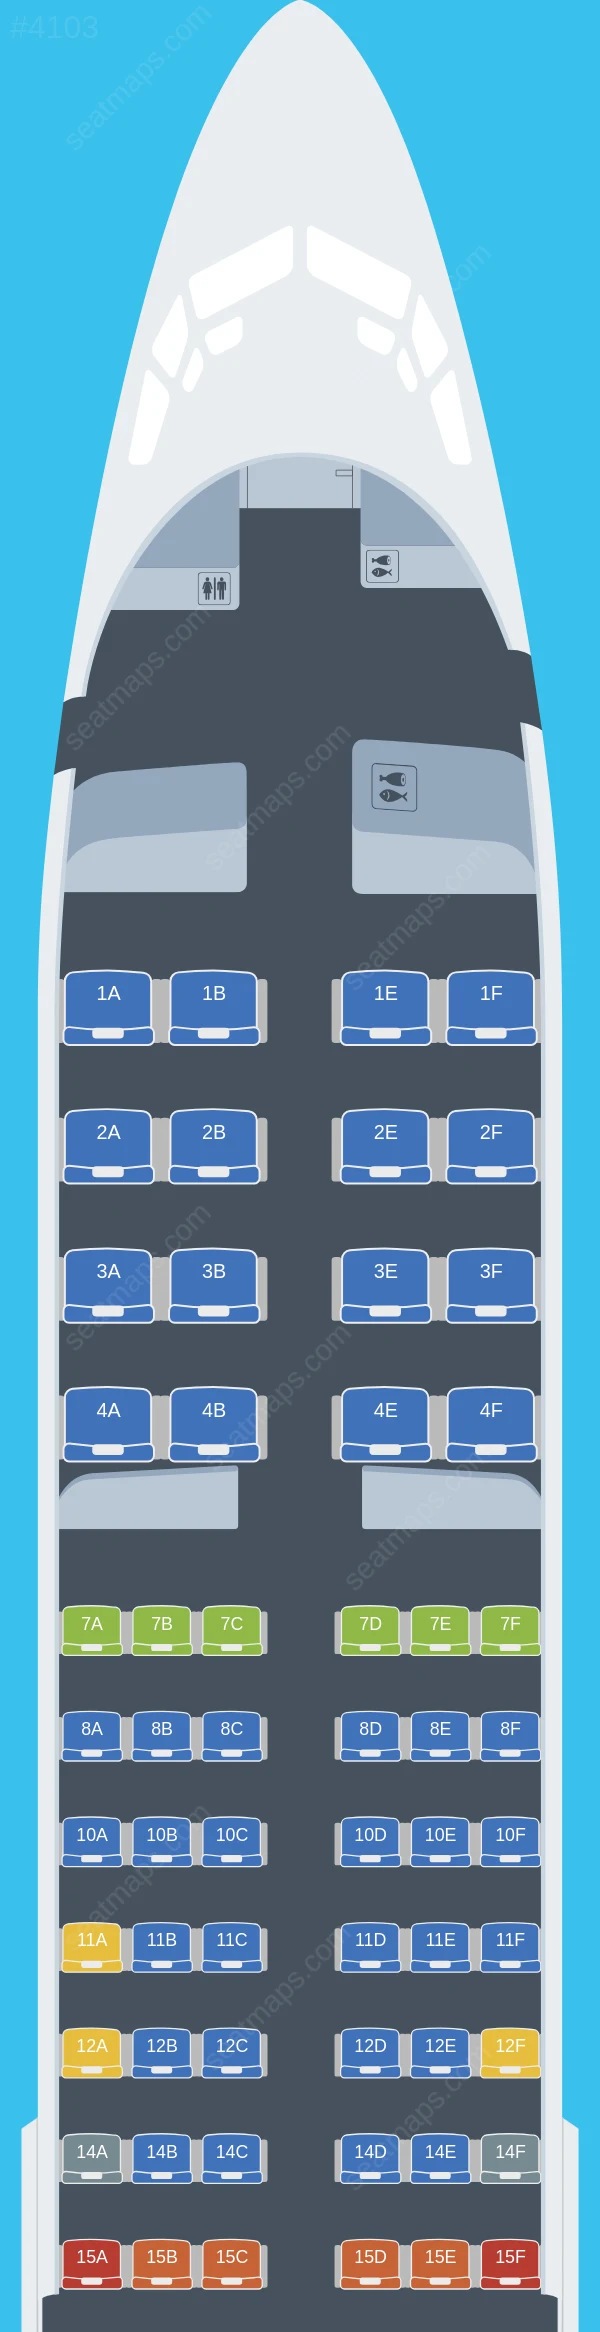 United Boeing 737-800 V.2 seatmap preview